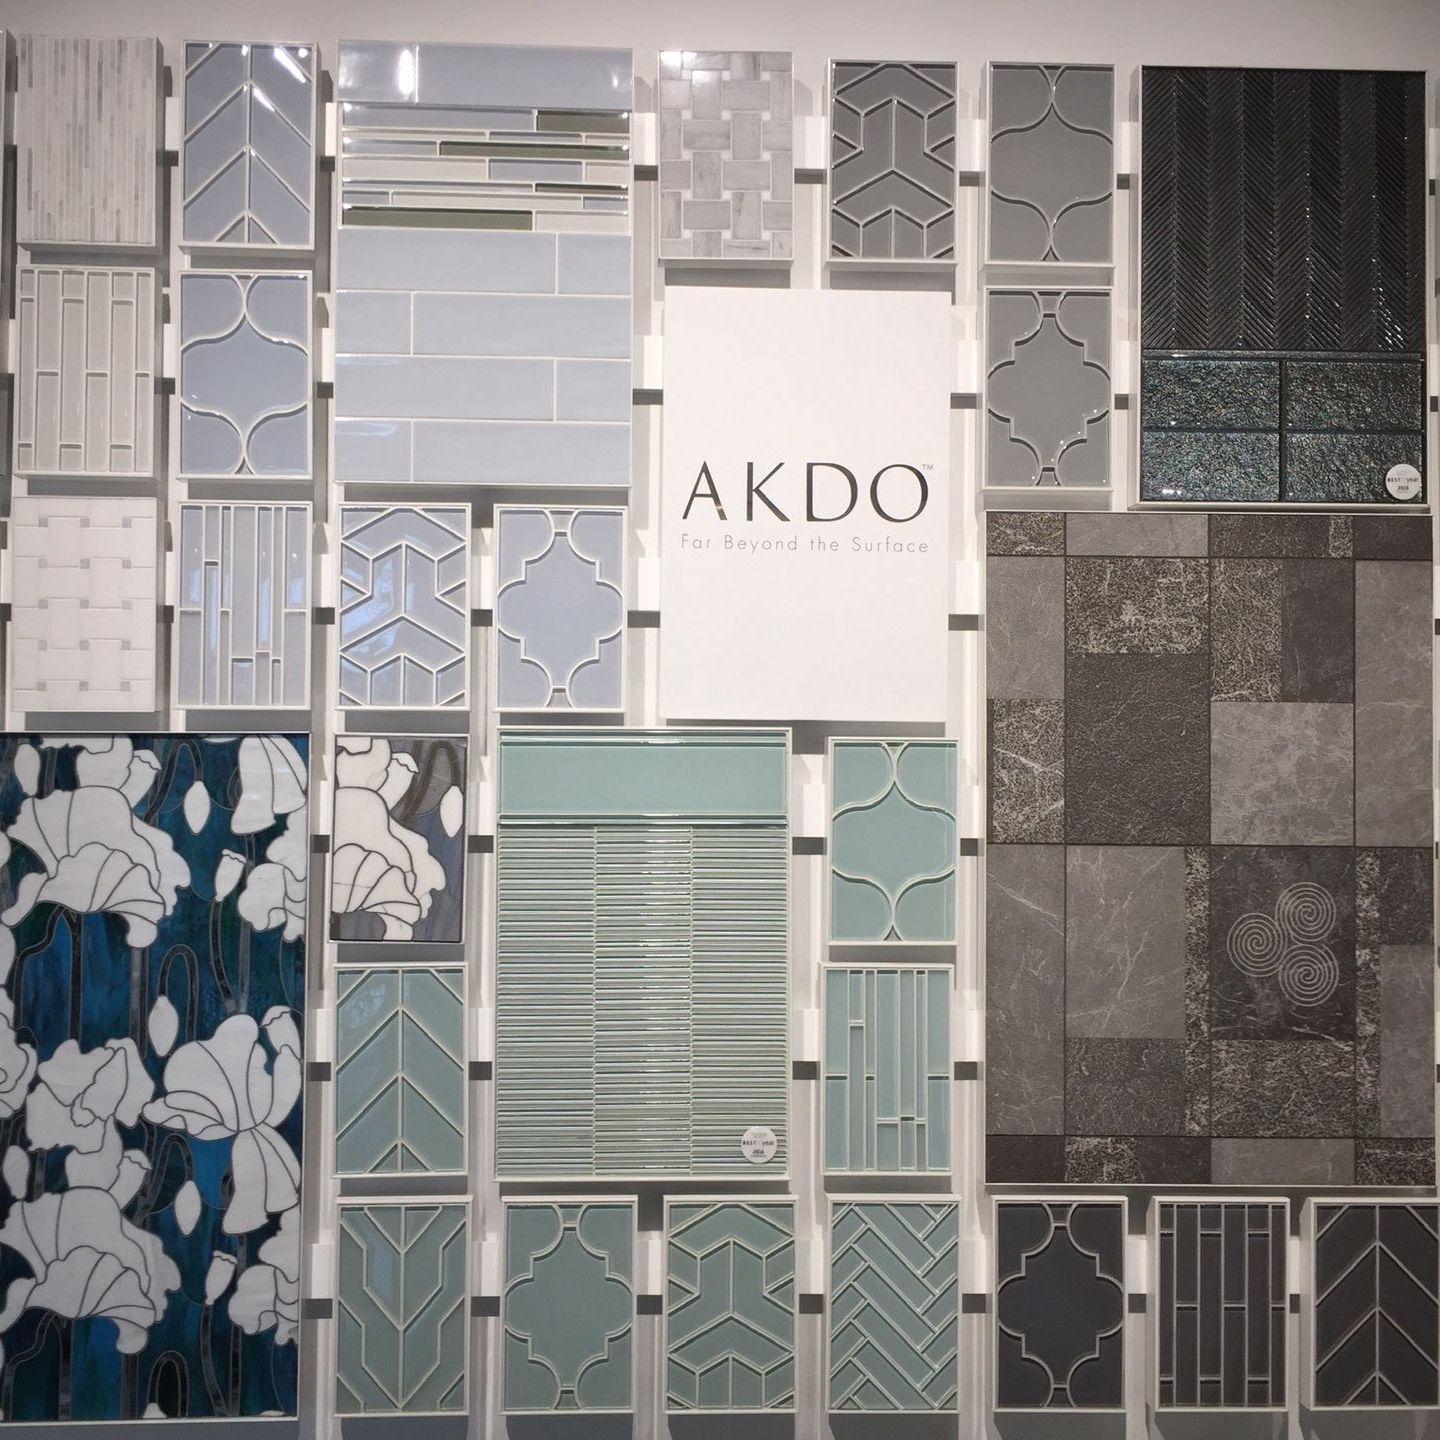 A wall of tiles with a sign that says akdo